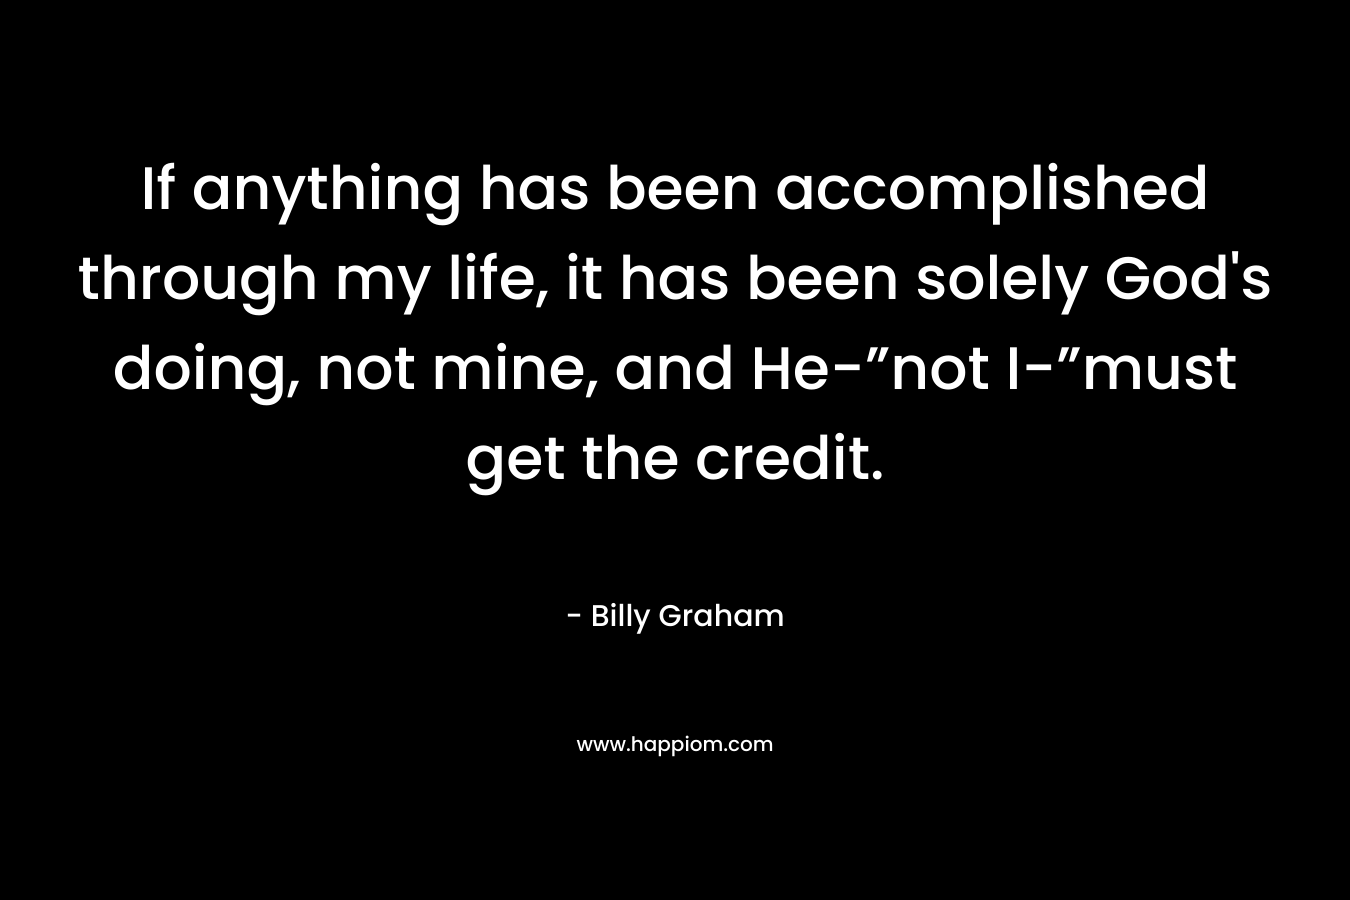 If anything has been accomplished through my life, it has been solely God's doing, not mine, and He-”not I-”must get the credit.